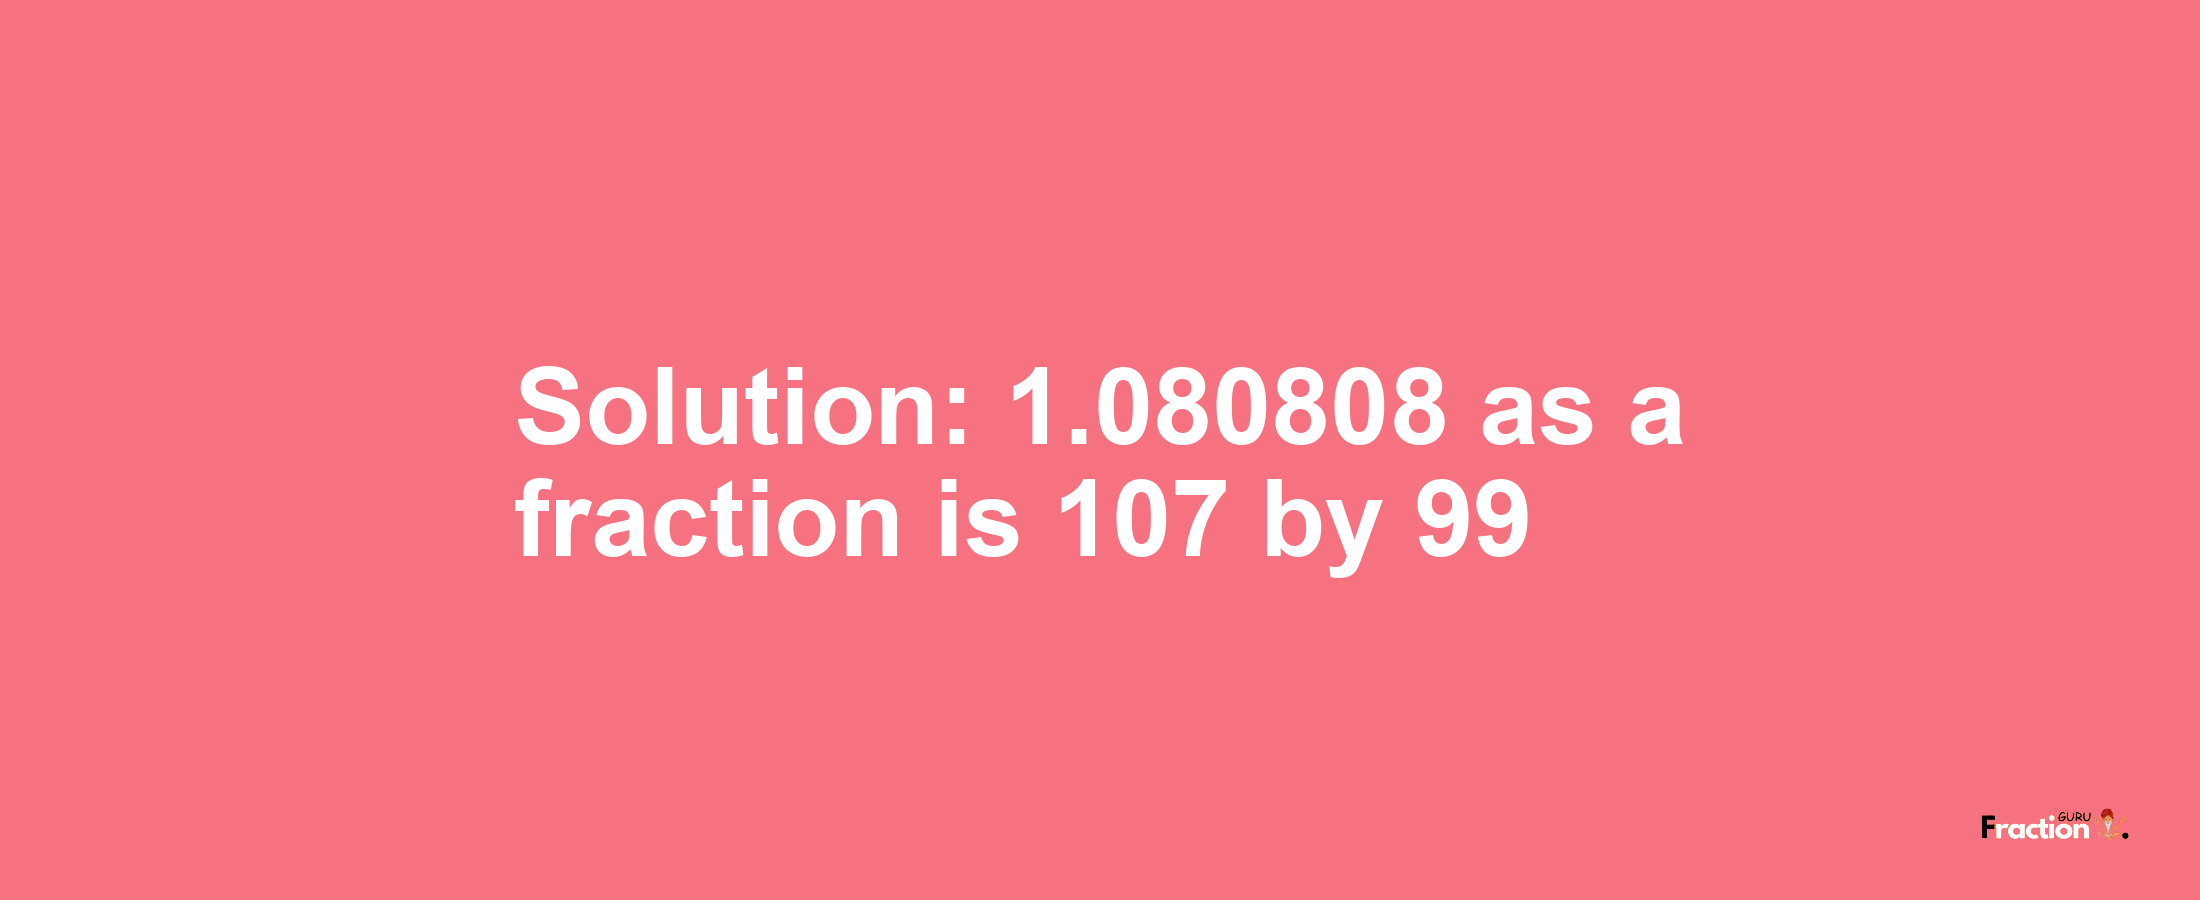 Solution:1.080808 as a fraction is 107/99